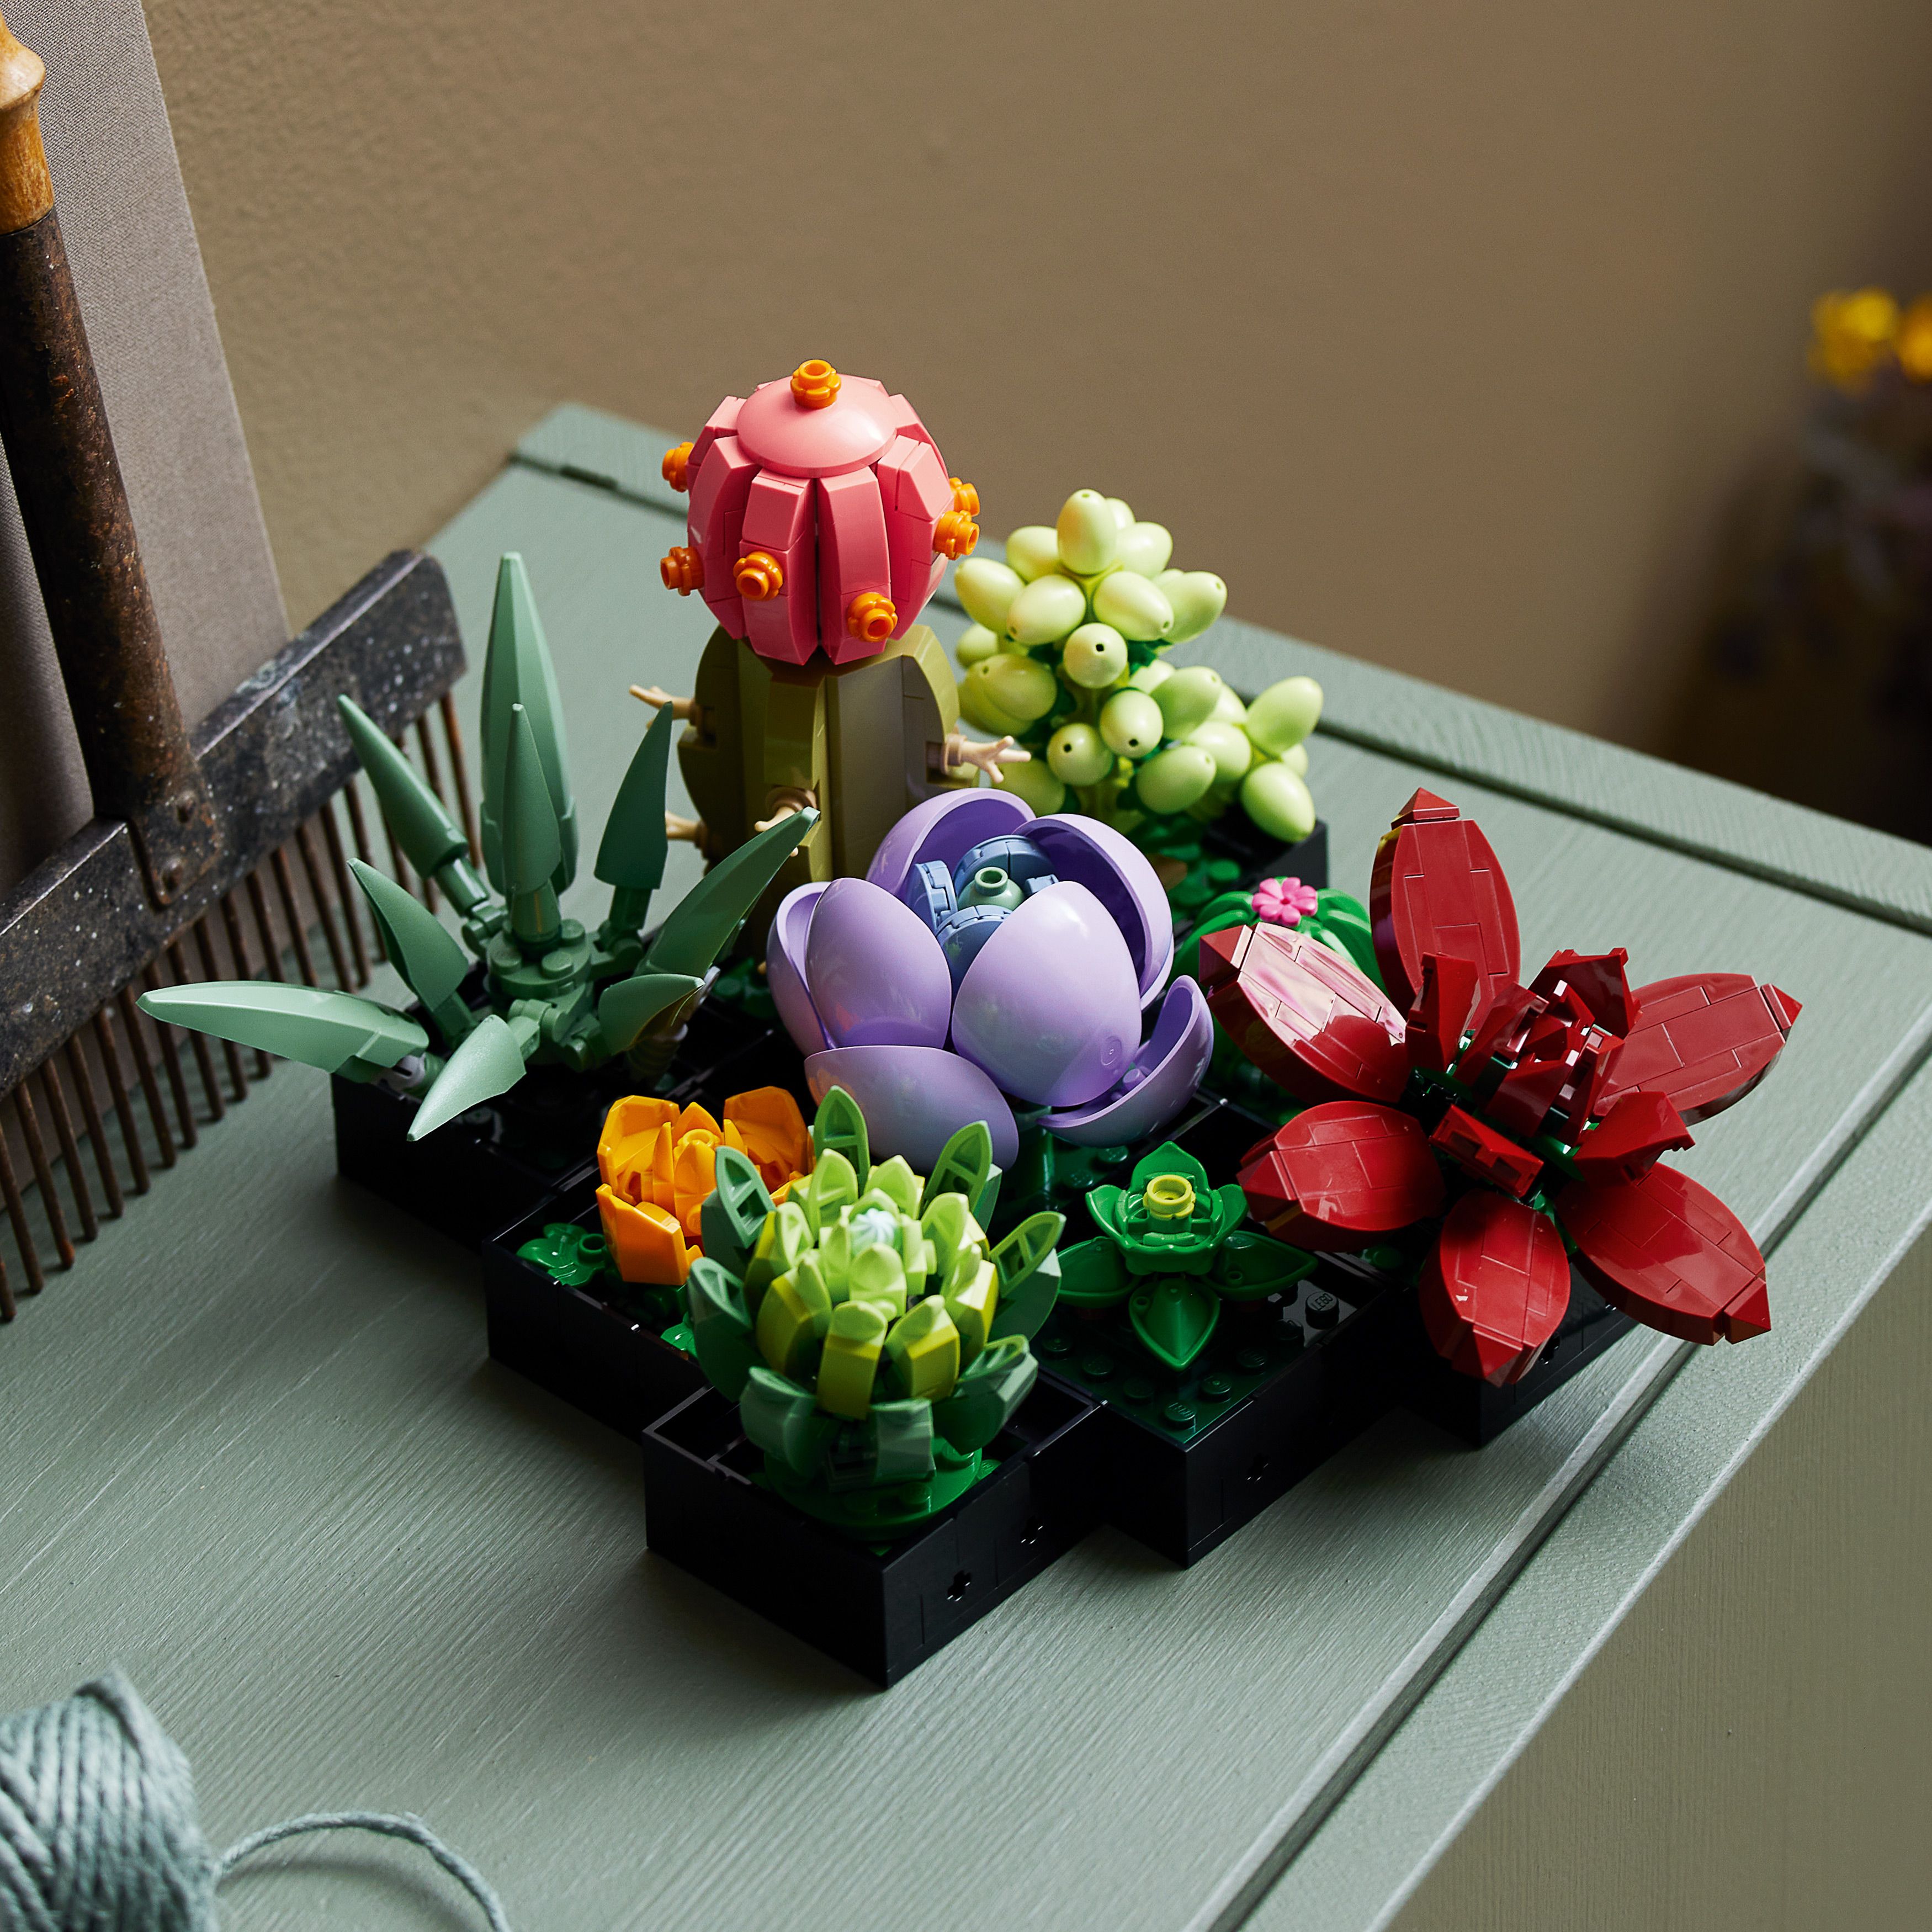 Lego Flower Collection Includes an Orchid and Succulents - Lego